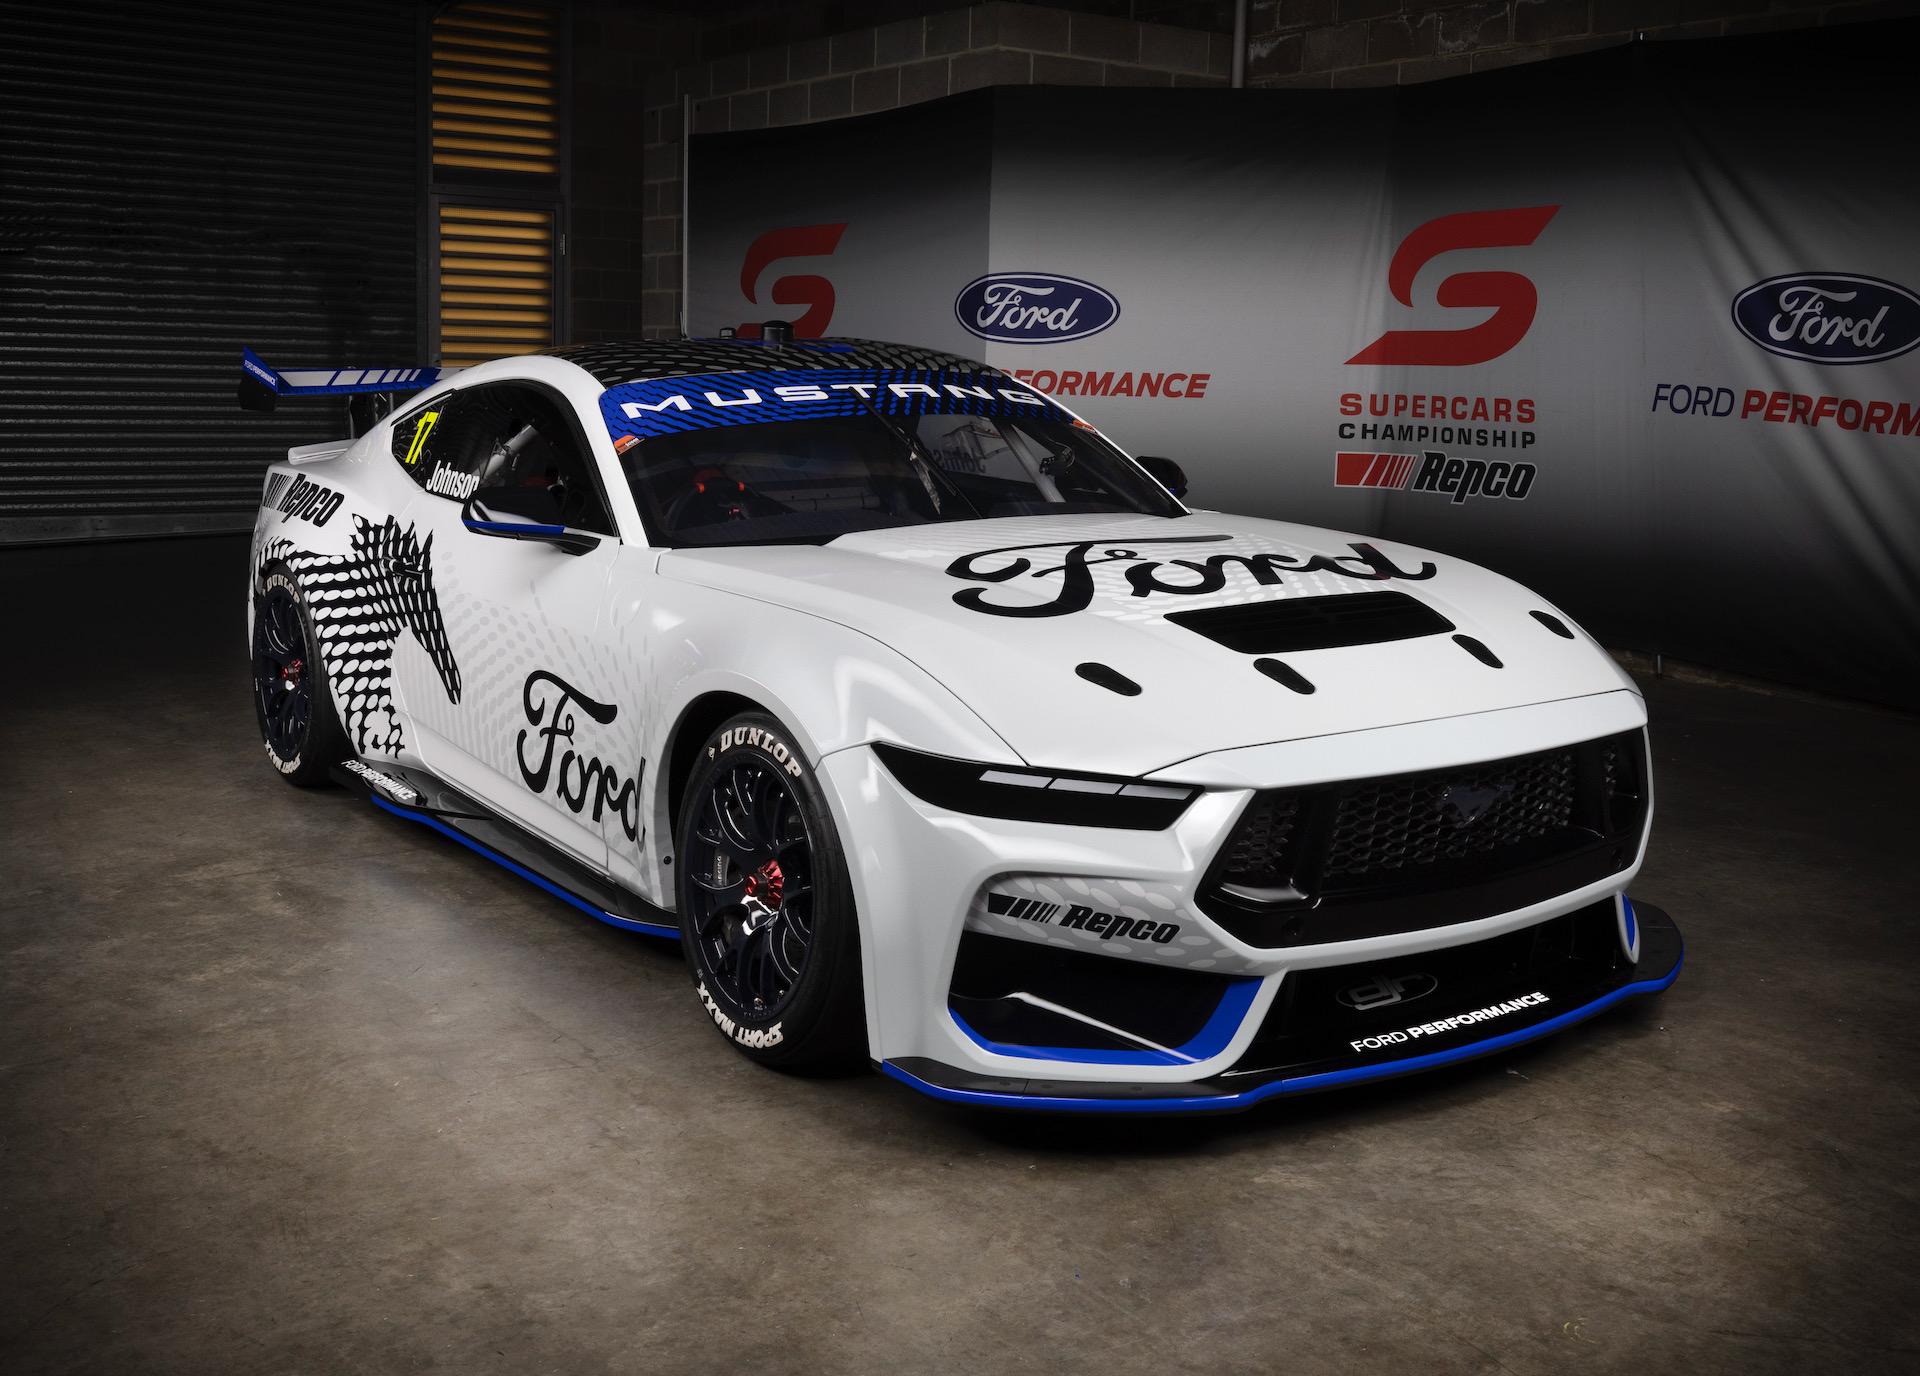 2023 Ford Mustang GT Supercars ‘Gen3’ race car revealed at Bathurst